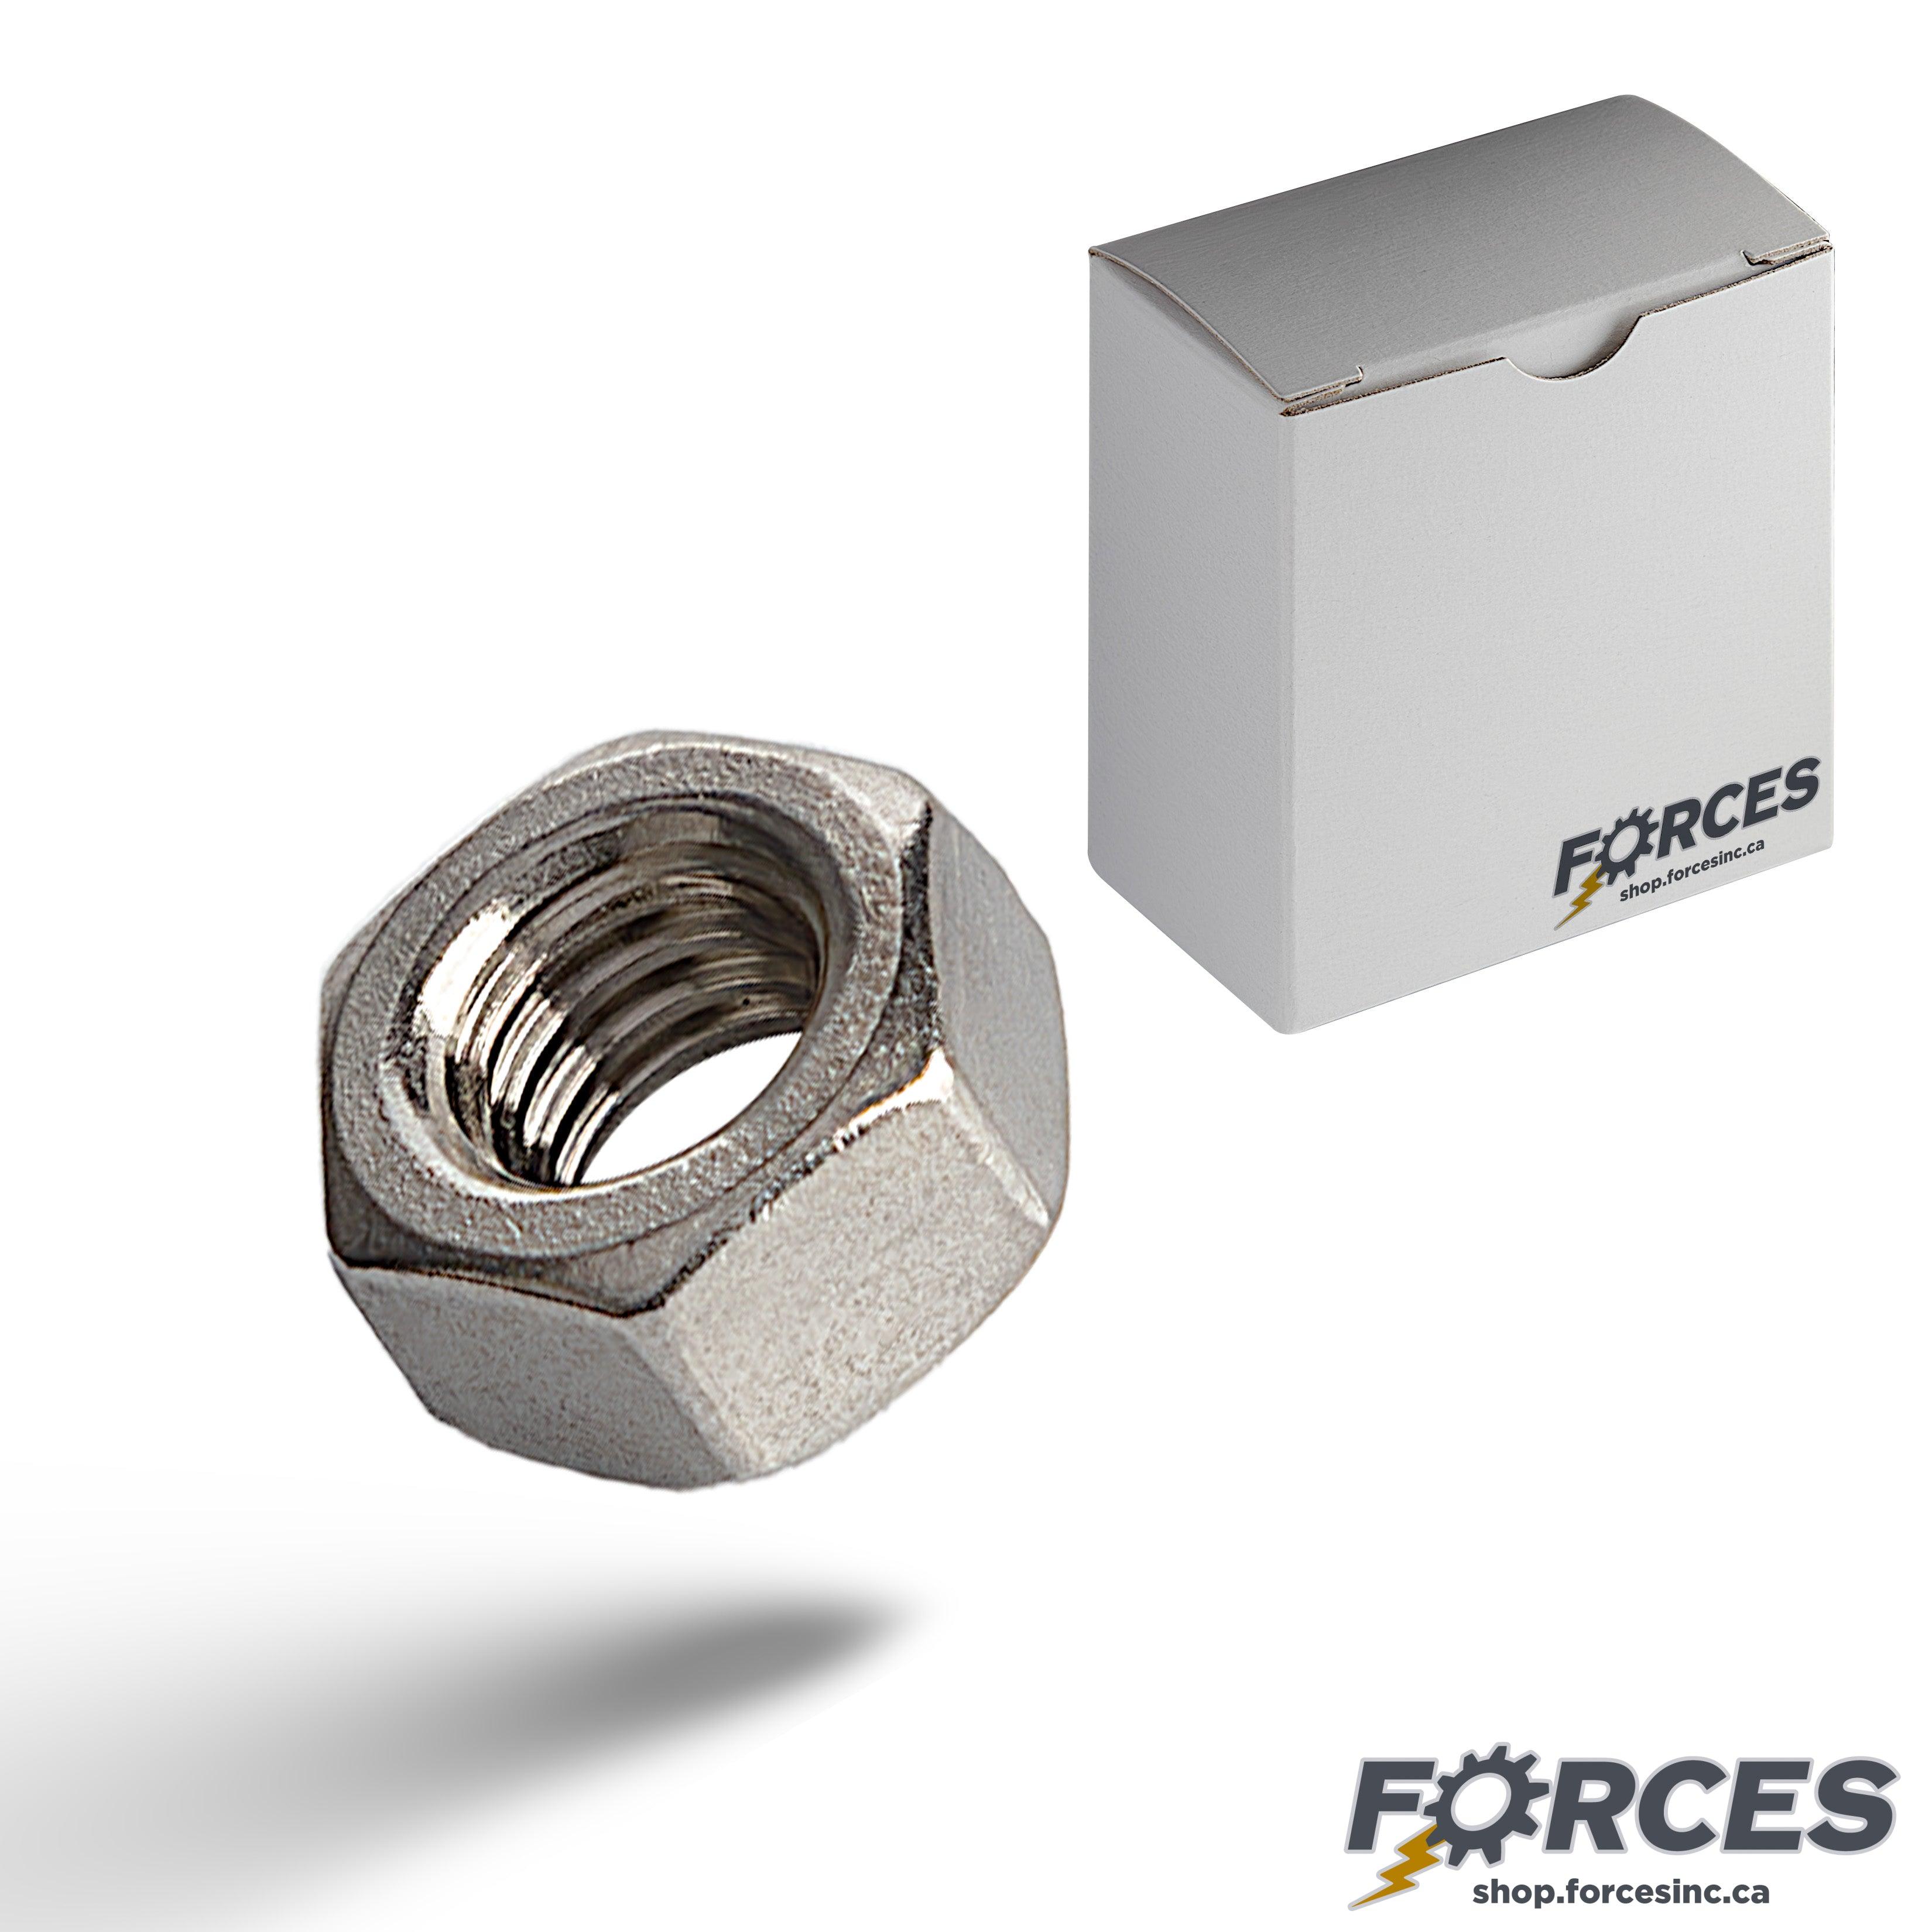 12-24 Hex Nut 18-8 Stainless Steel 304 (100/Box) - Forces Inc